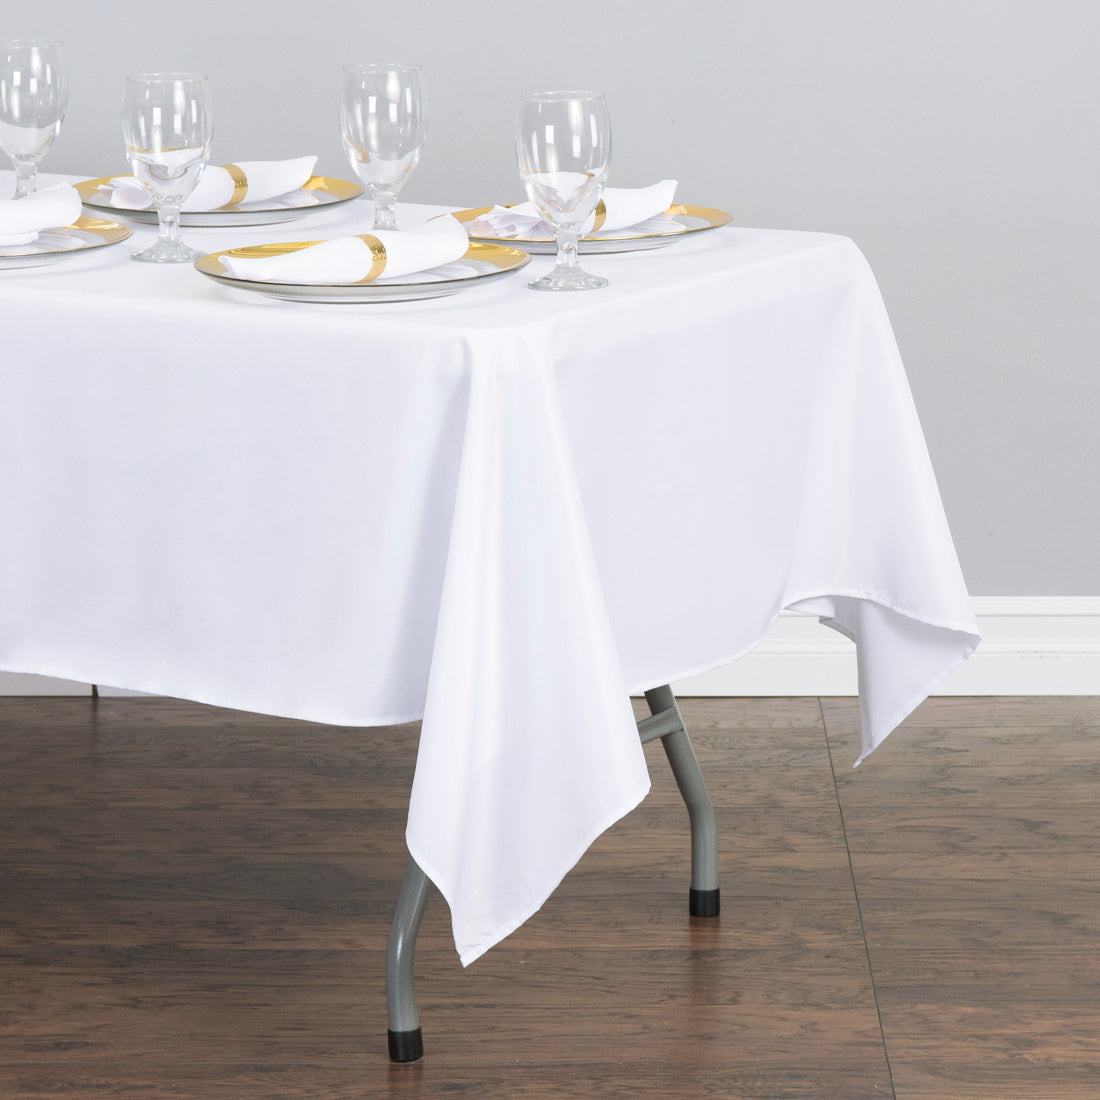 60 by 126 in. Tablecloths